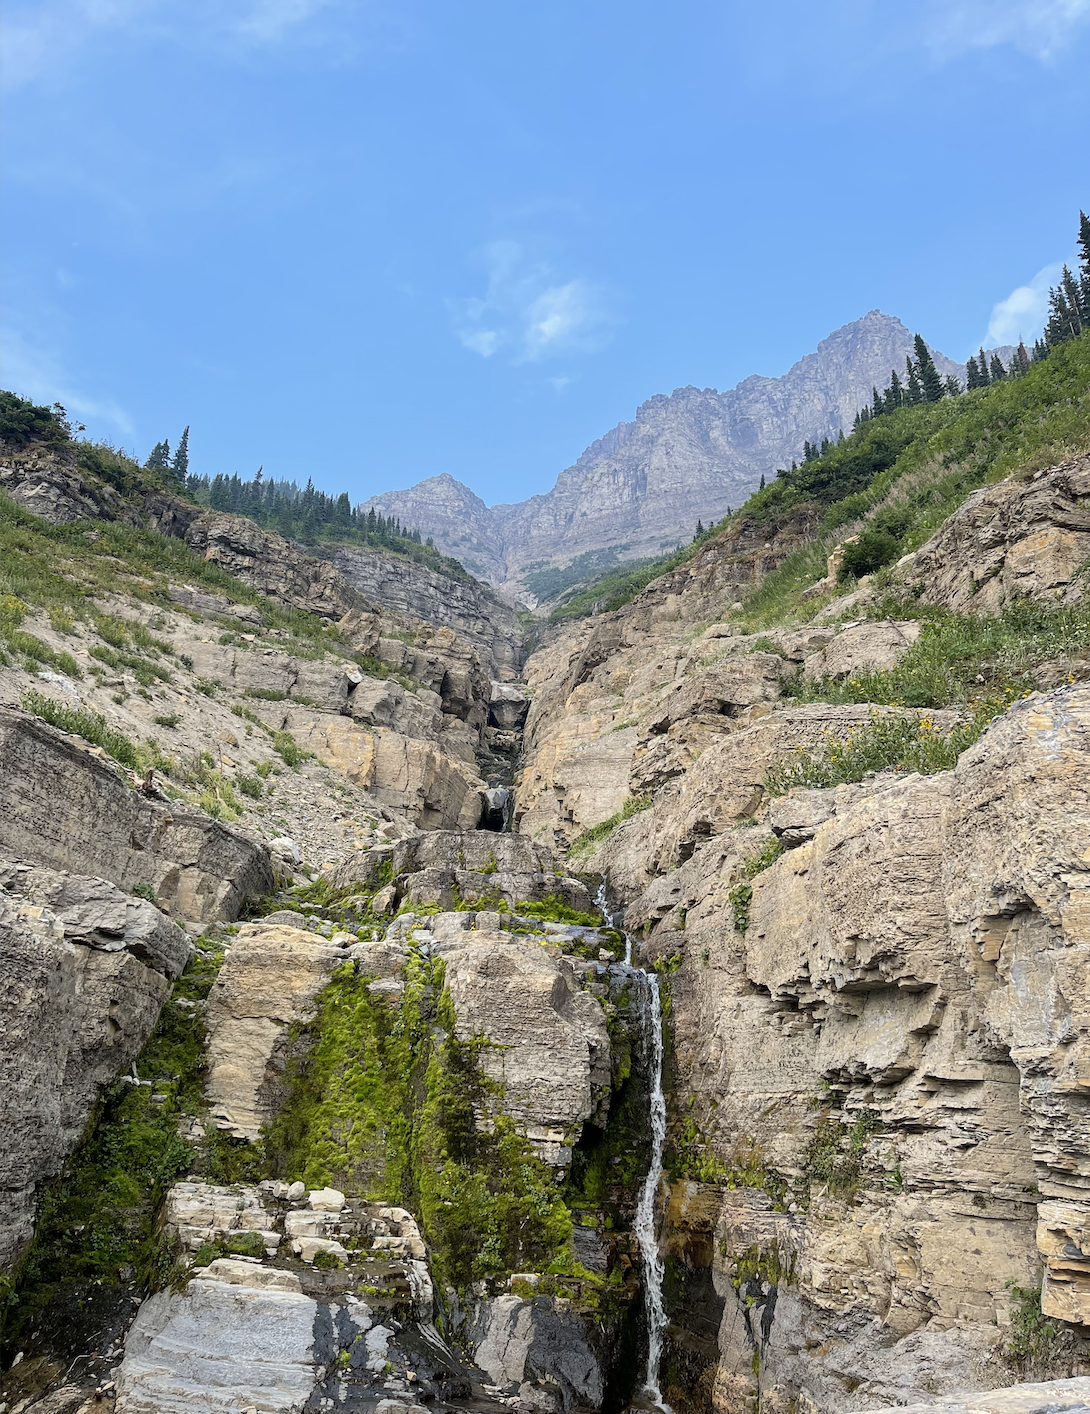 Montana Travel Guide - We rounded up our entire hiking and adventure trip to Glacier National Park & Big Sky Country with this helpful planning post!